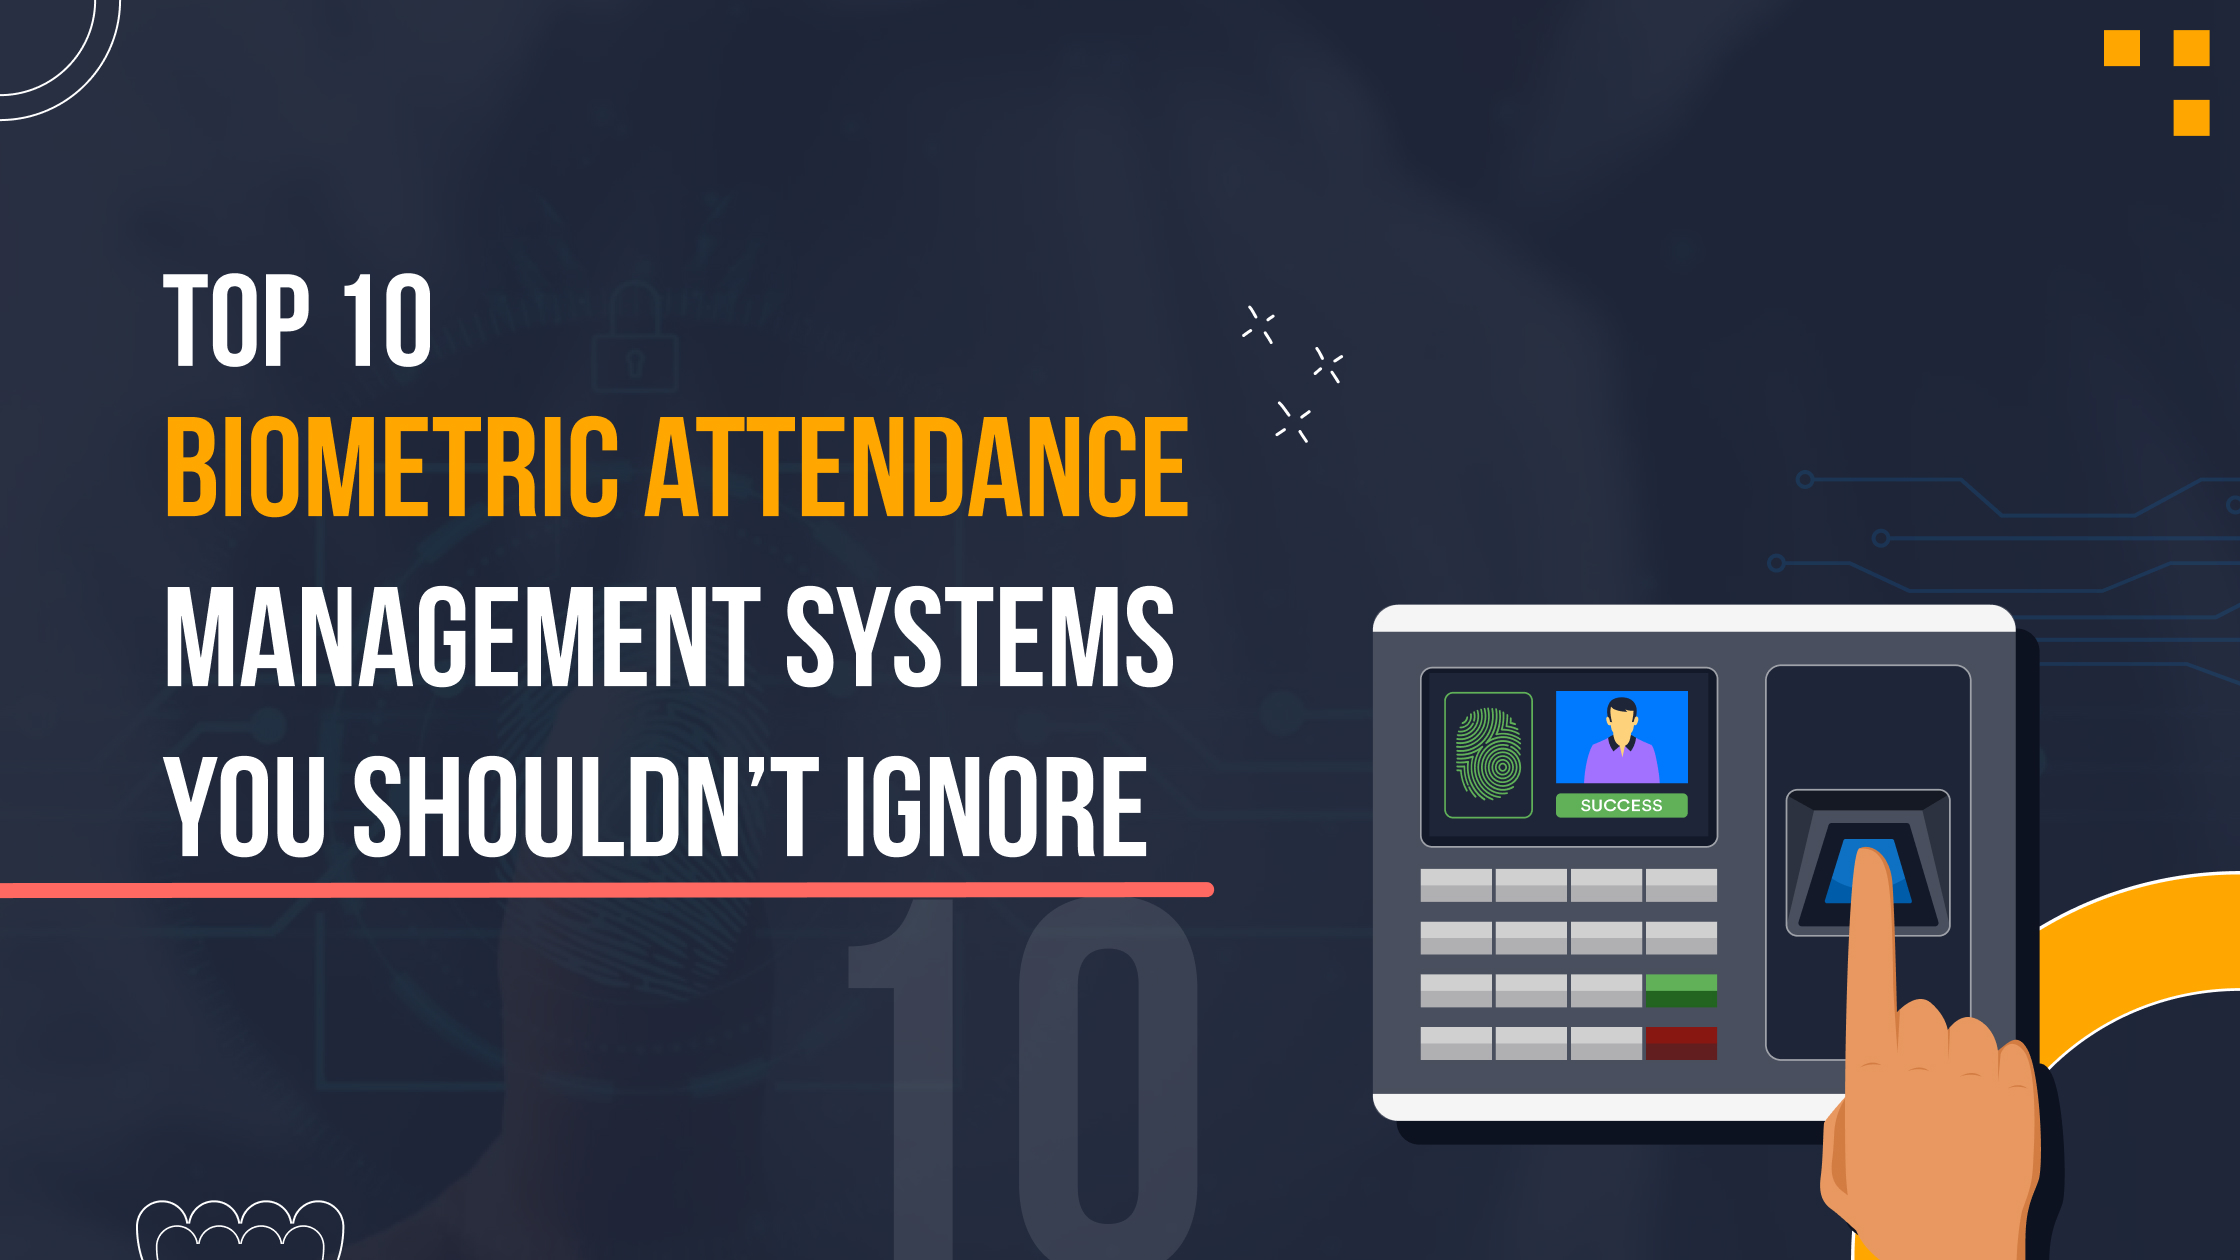 Top 10 Biometric Attendance Management Systems You Shouldnt Ignore